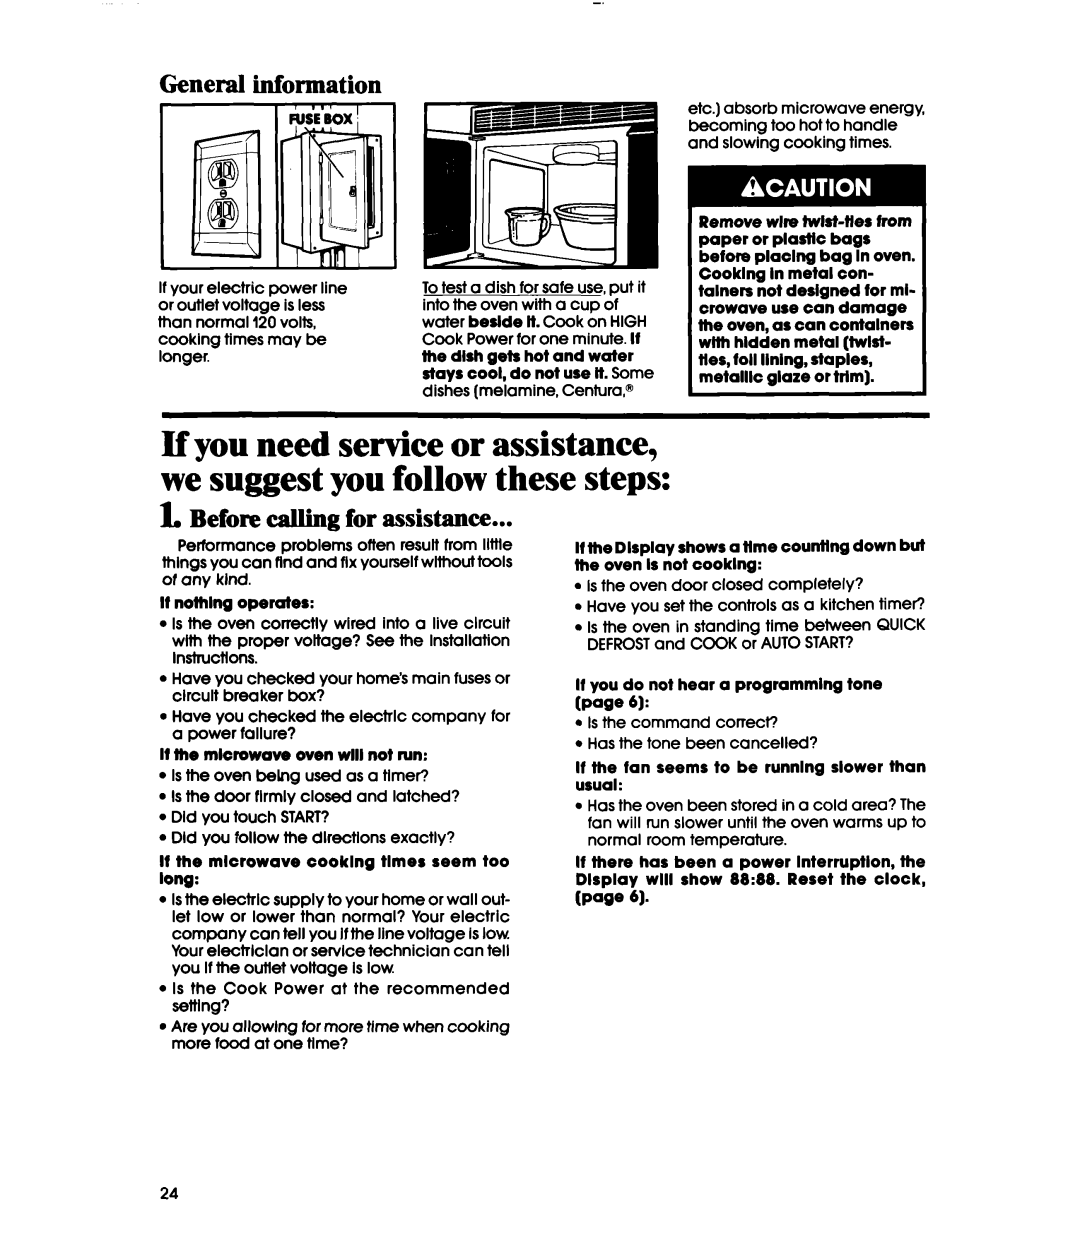 Whirlpool MH6100XY manual General information, Before calling for assistance, If nothlng operates 